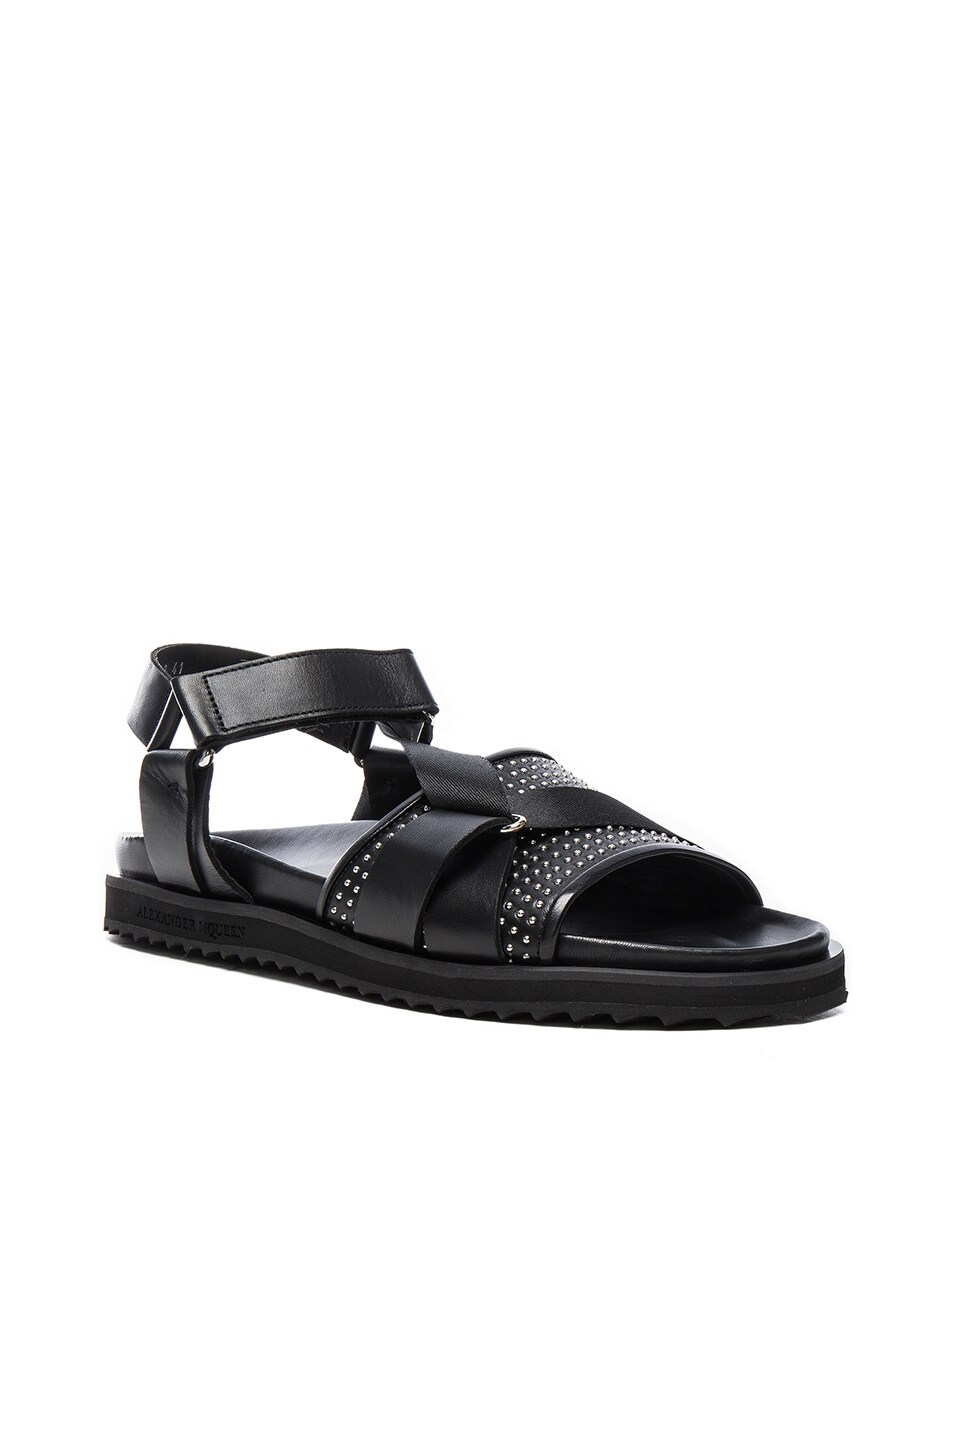 Image 1 of Alexander McQueen Studded Leather Sandals in Black